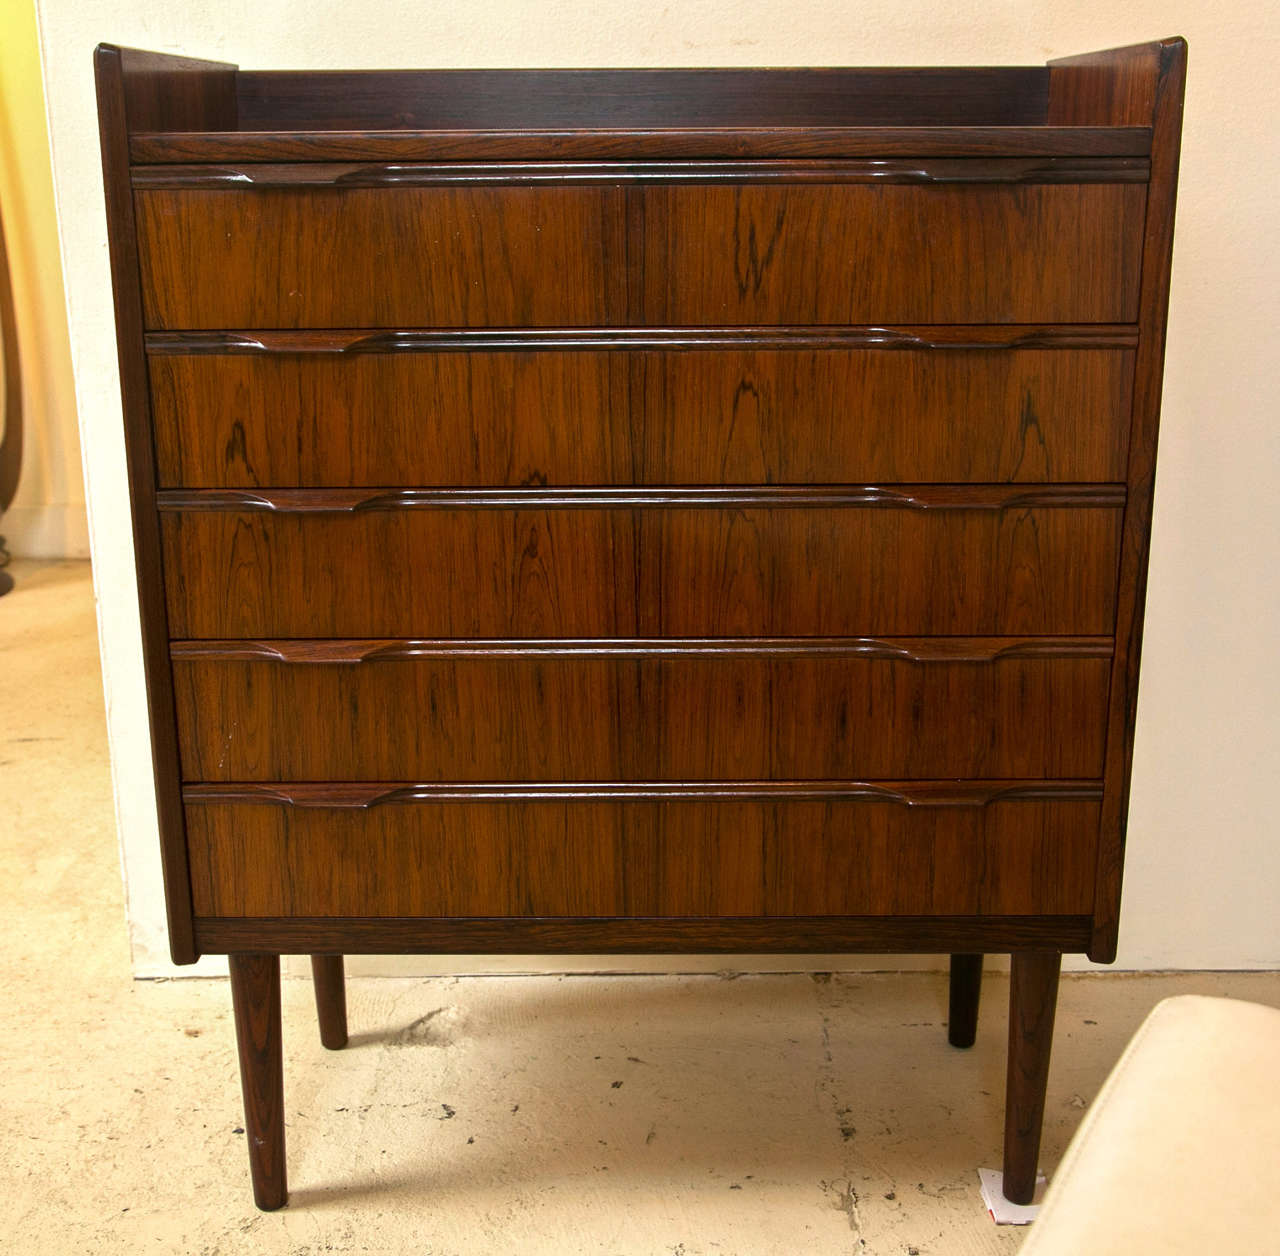 Knud Nielsen Rosewood Chest of Drawers In Excellent Condition For Sale In Stamford, CT